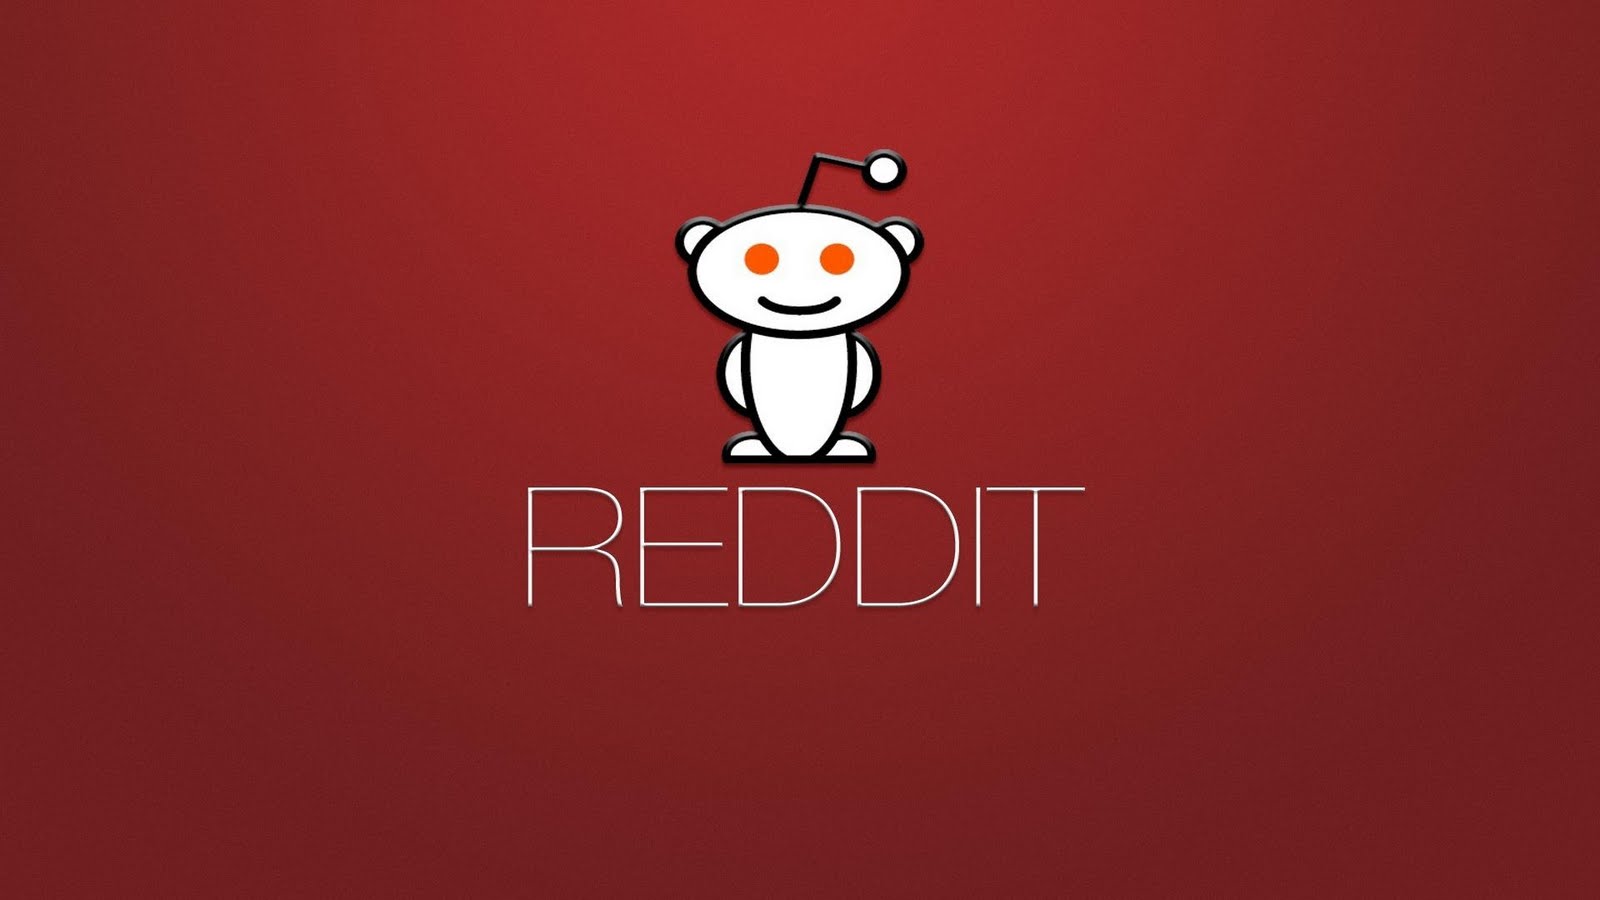 Reddit Wallpapers High Quality | Download Free